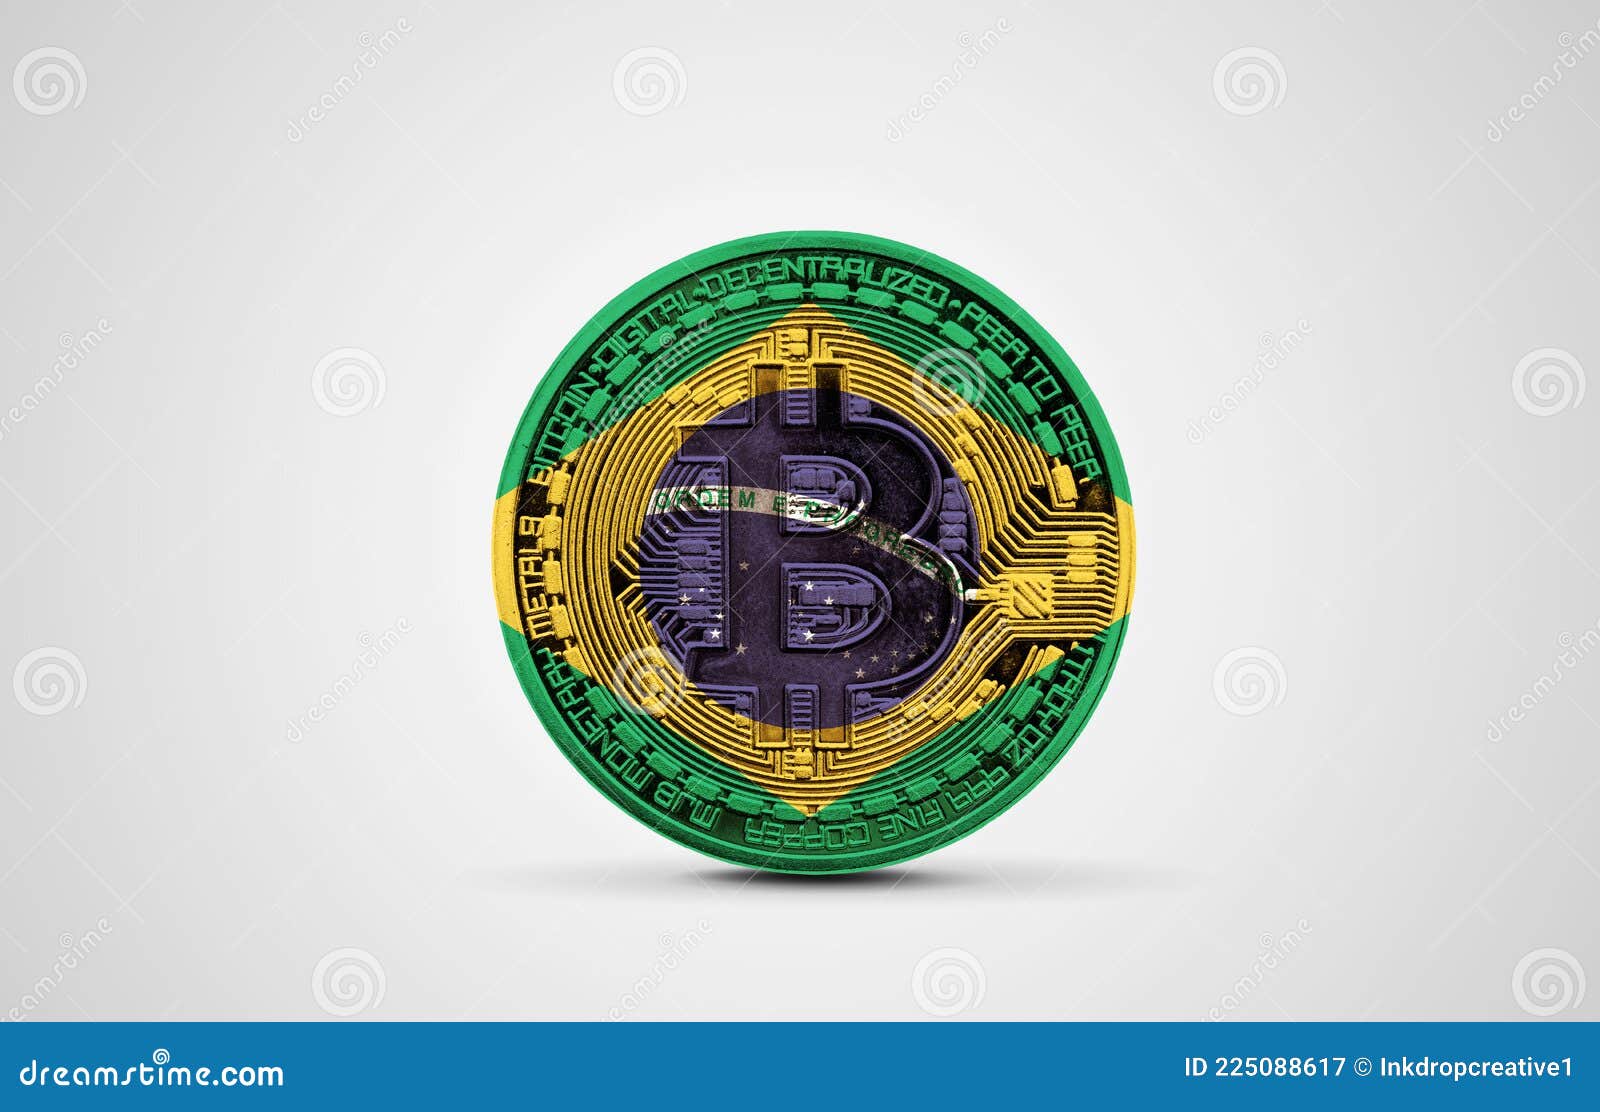 2, Bitcoin Brazil Royalty-Free Images, Stock Photos & Pictures | Shutterstock